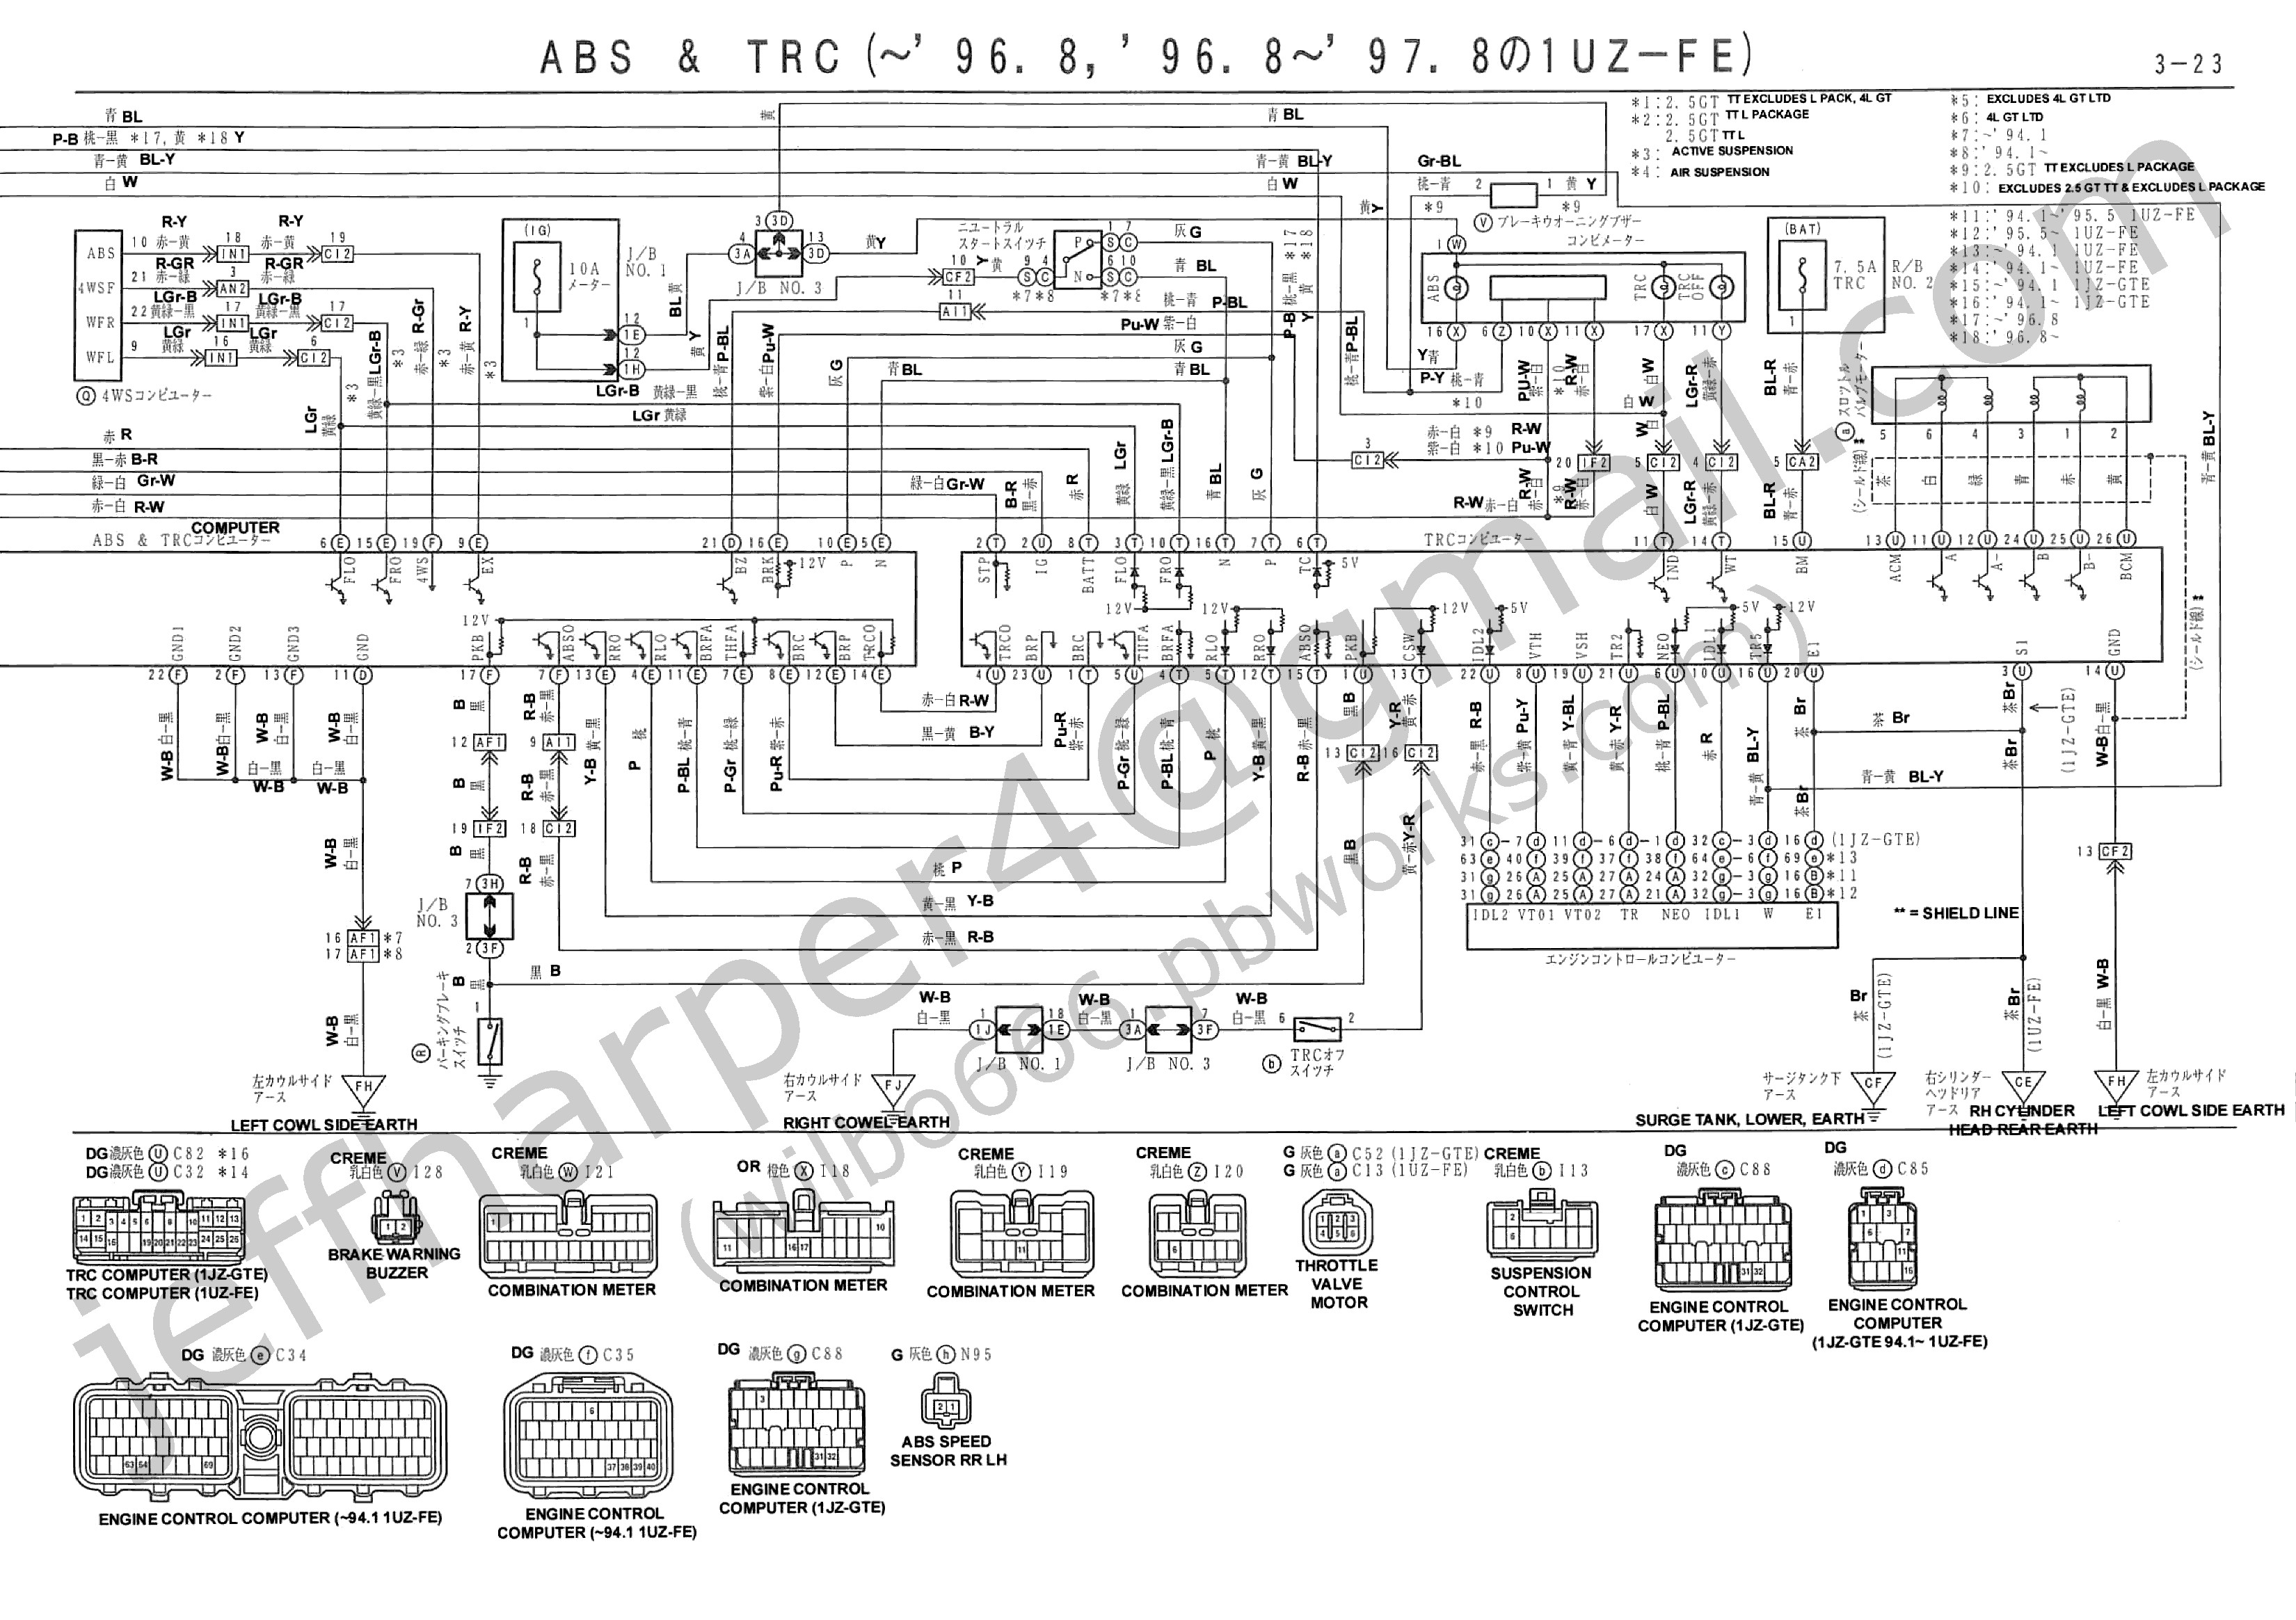 Car Engine Diagrams Free Schematic Symbols Threads Free Image About Wiring Diagram and